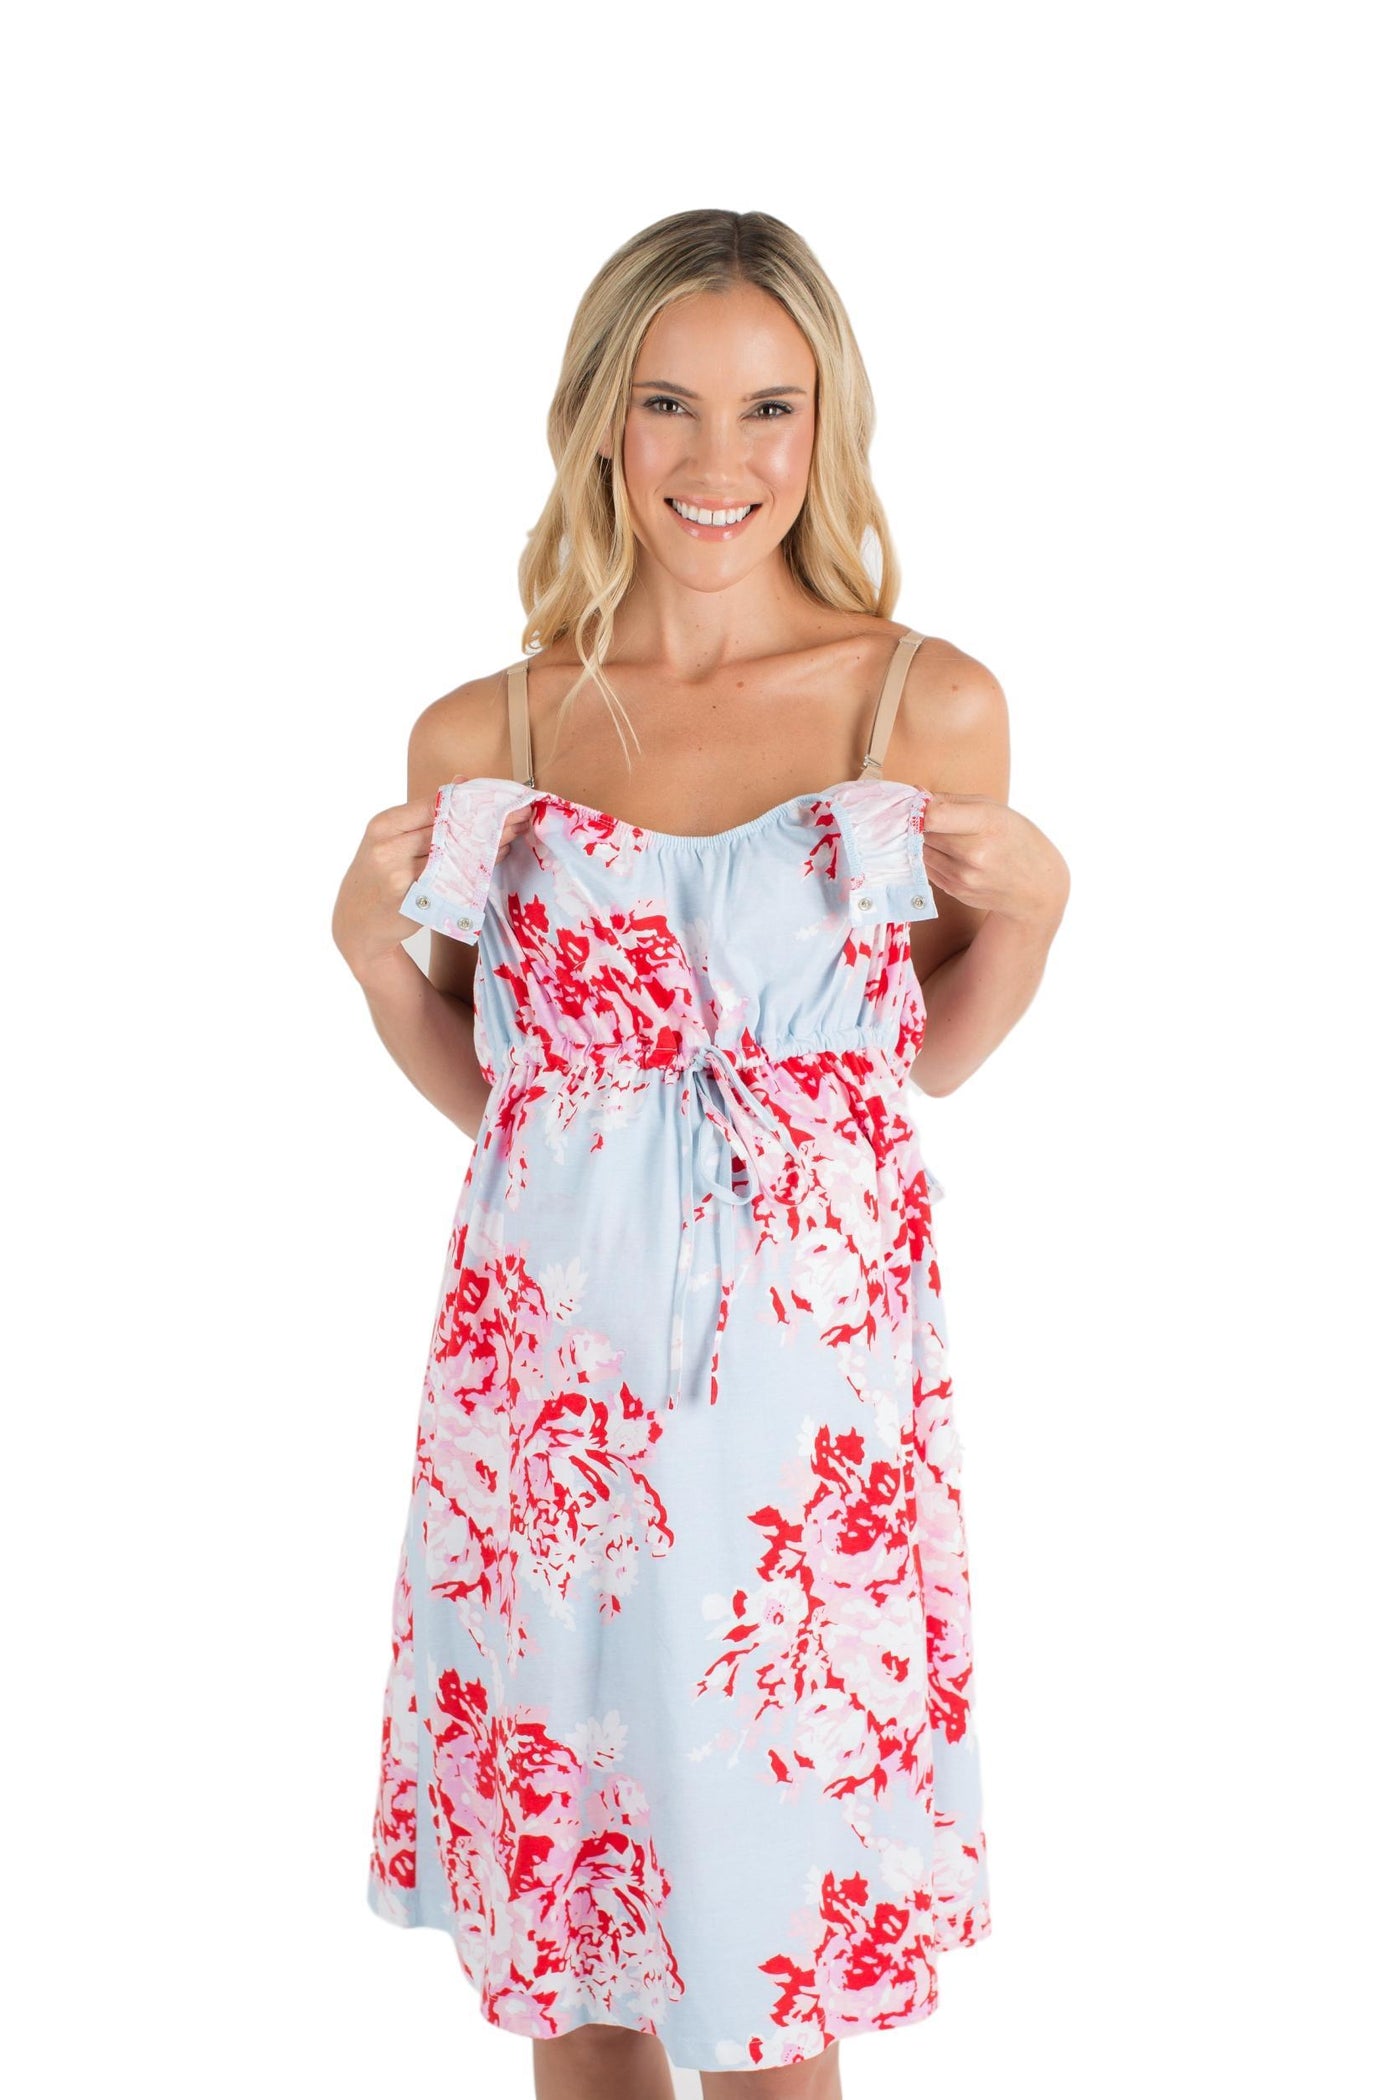 Mae Floral 3 in 1 Maternity Labor Delivery Nursing Hospital Birthing Gown & Matching Pregnancy/Postpartum Robe